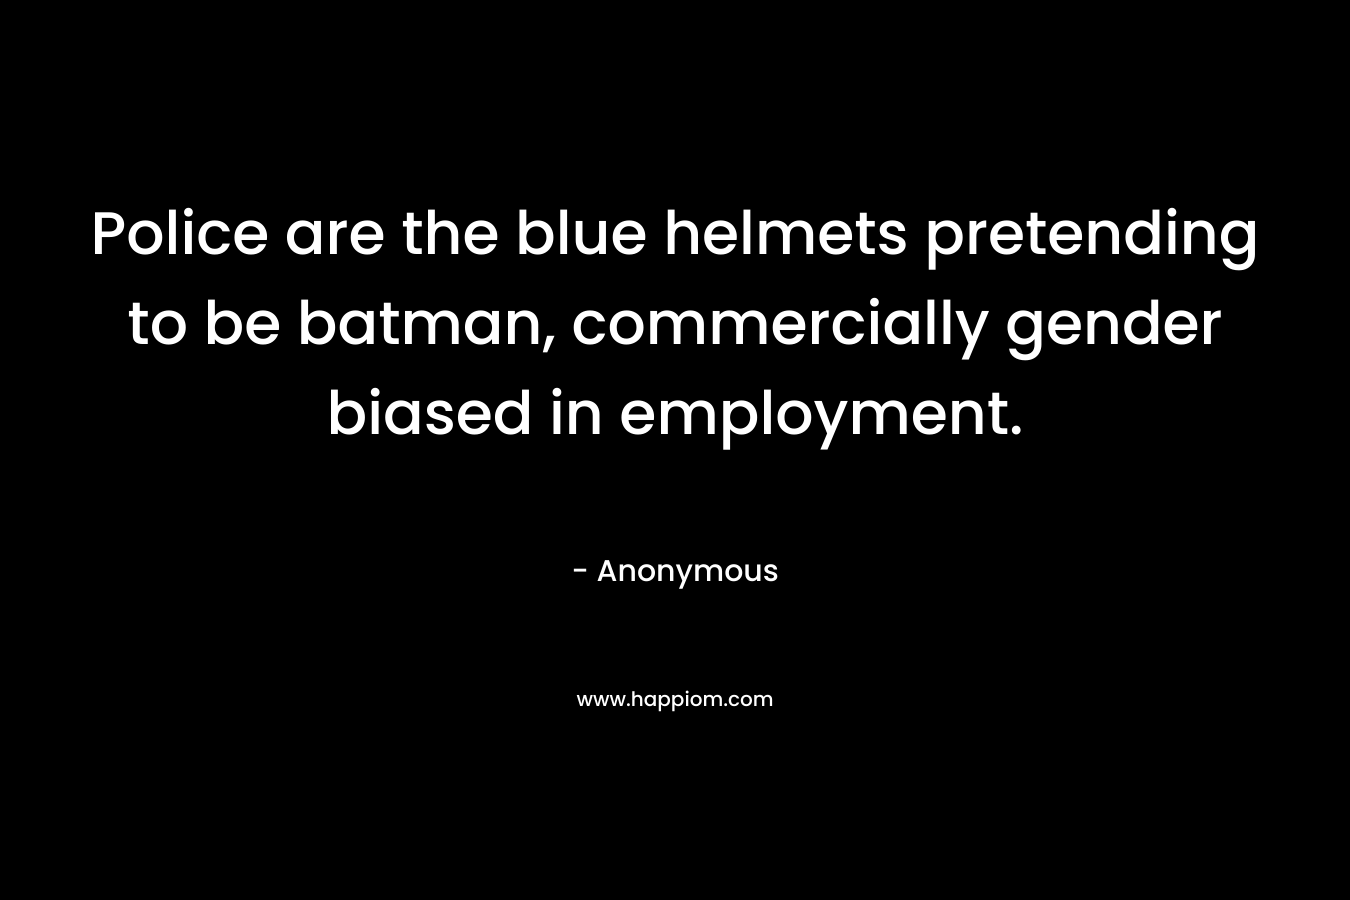 Police are the blue helmets pretending to be batman, commercially gender biased in employment. – Anonymous